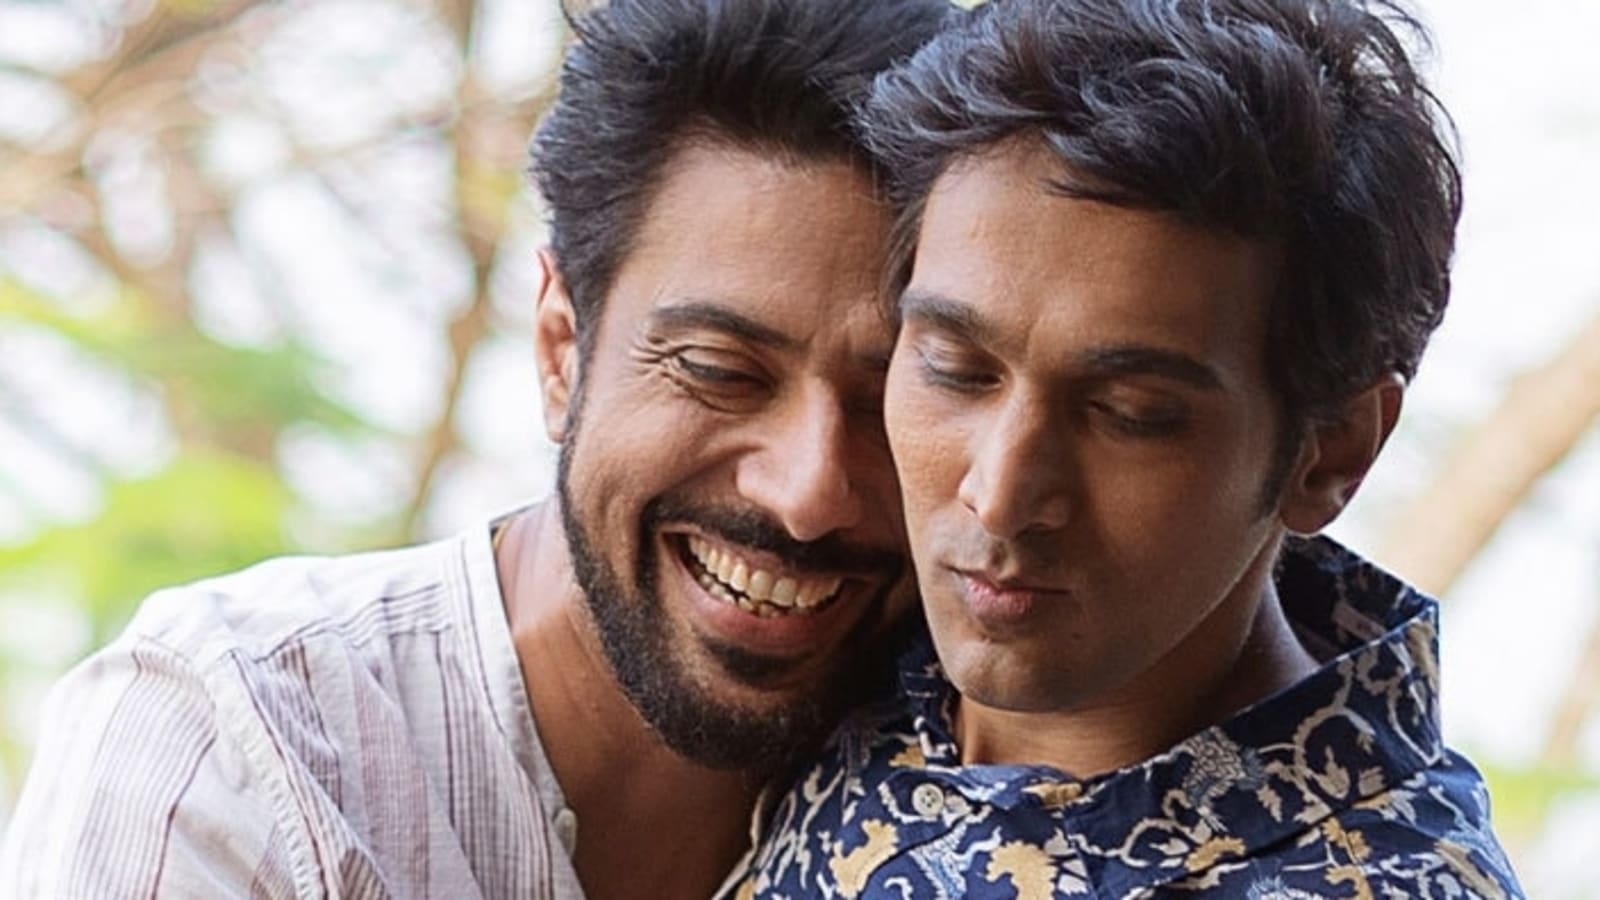 Modern Love Mumbai episode on gay love missing from Amazon Prime Video in UAE Web Series pic